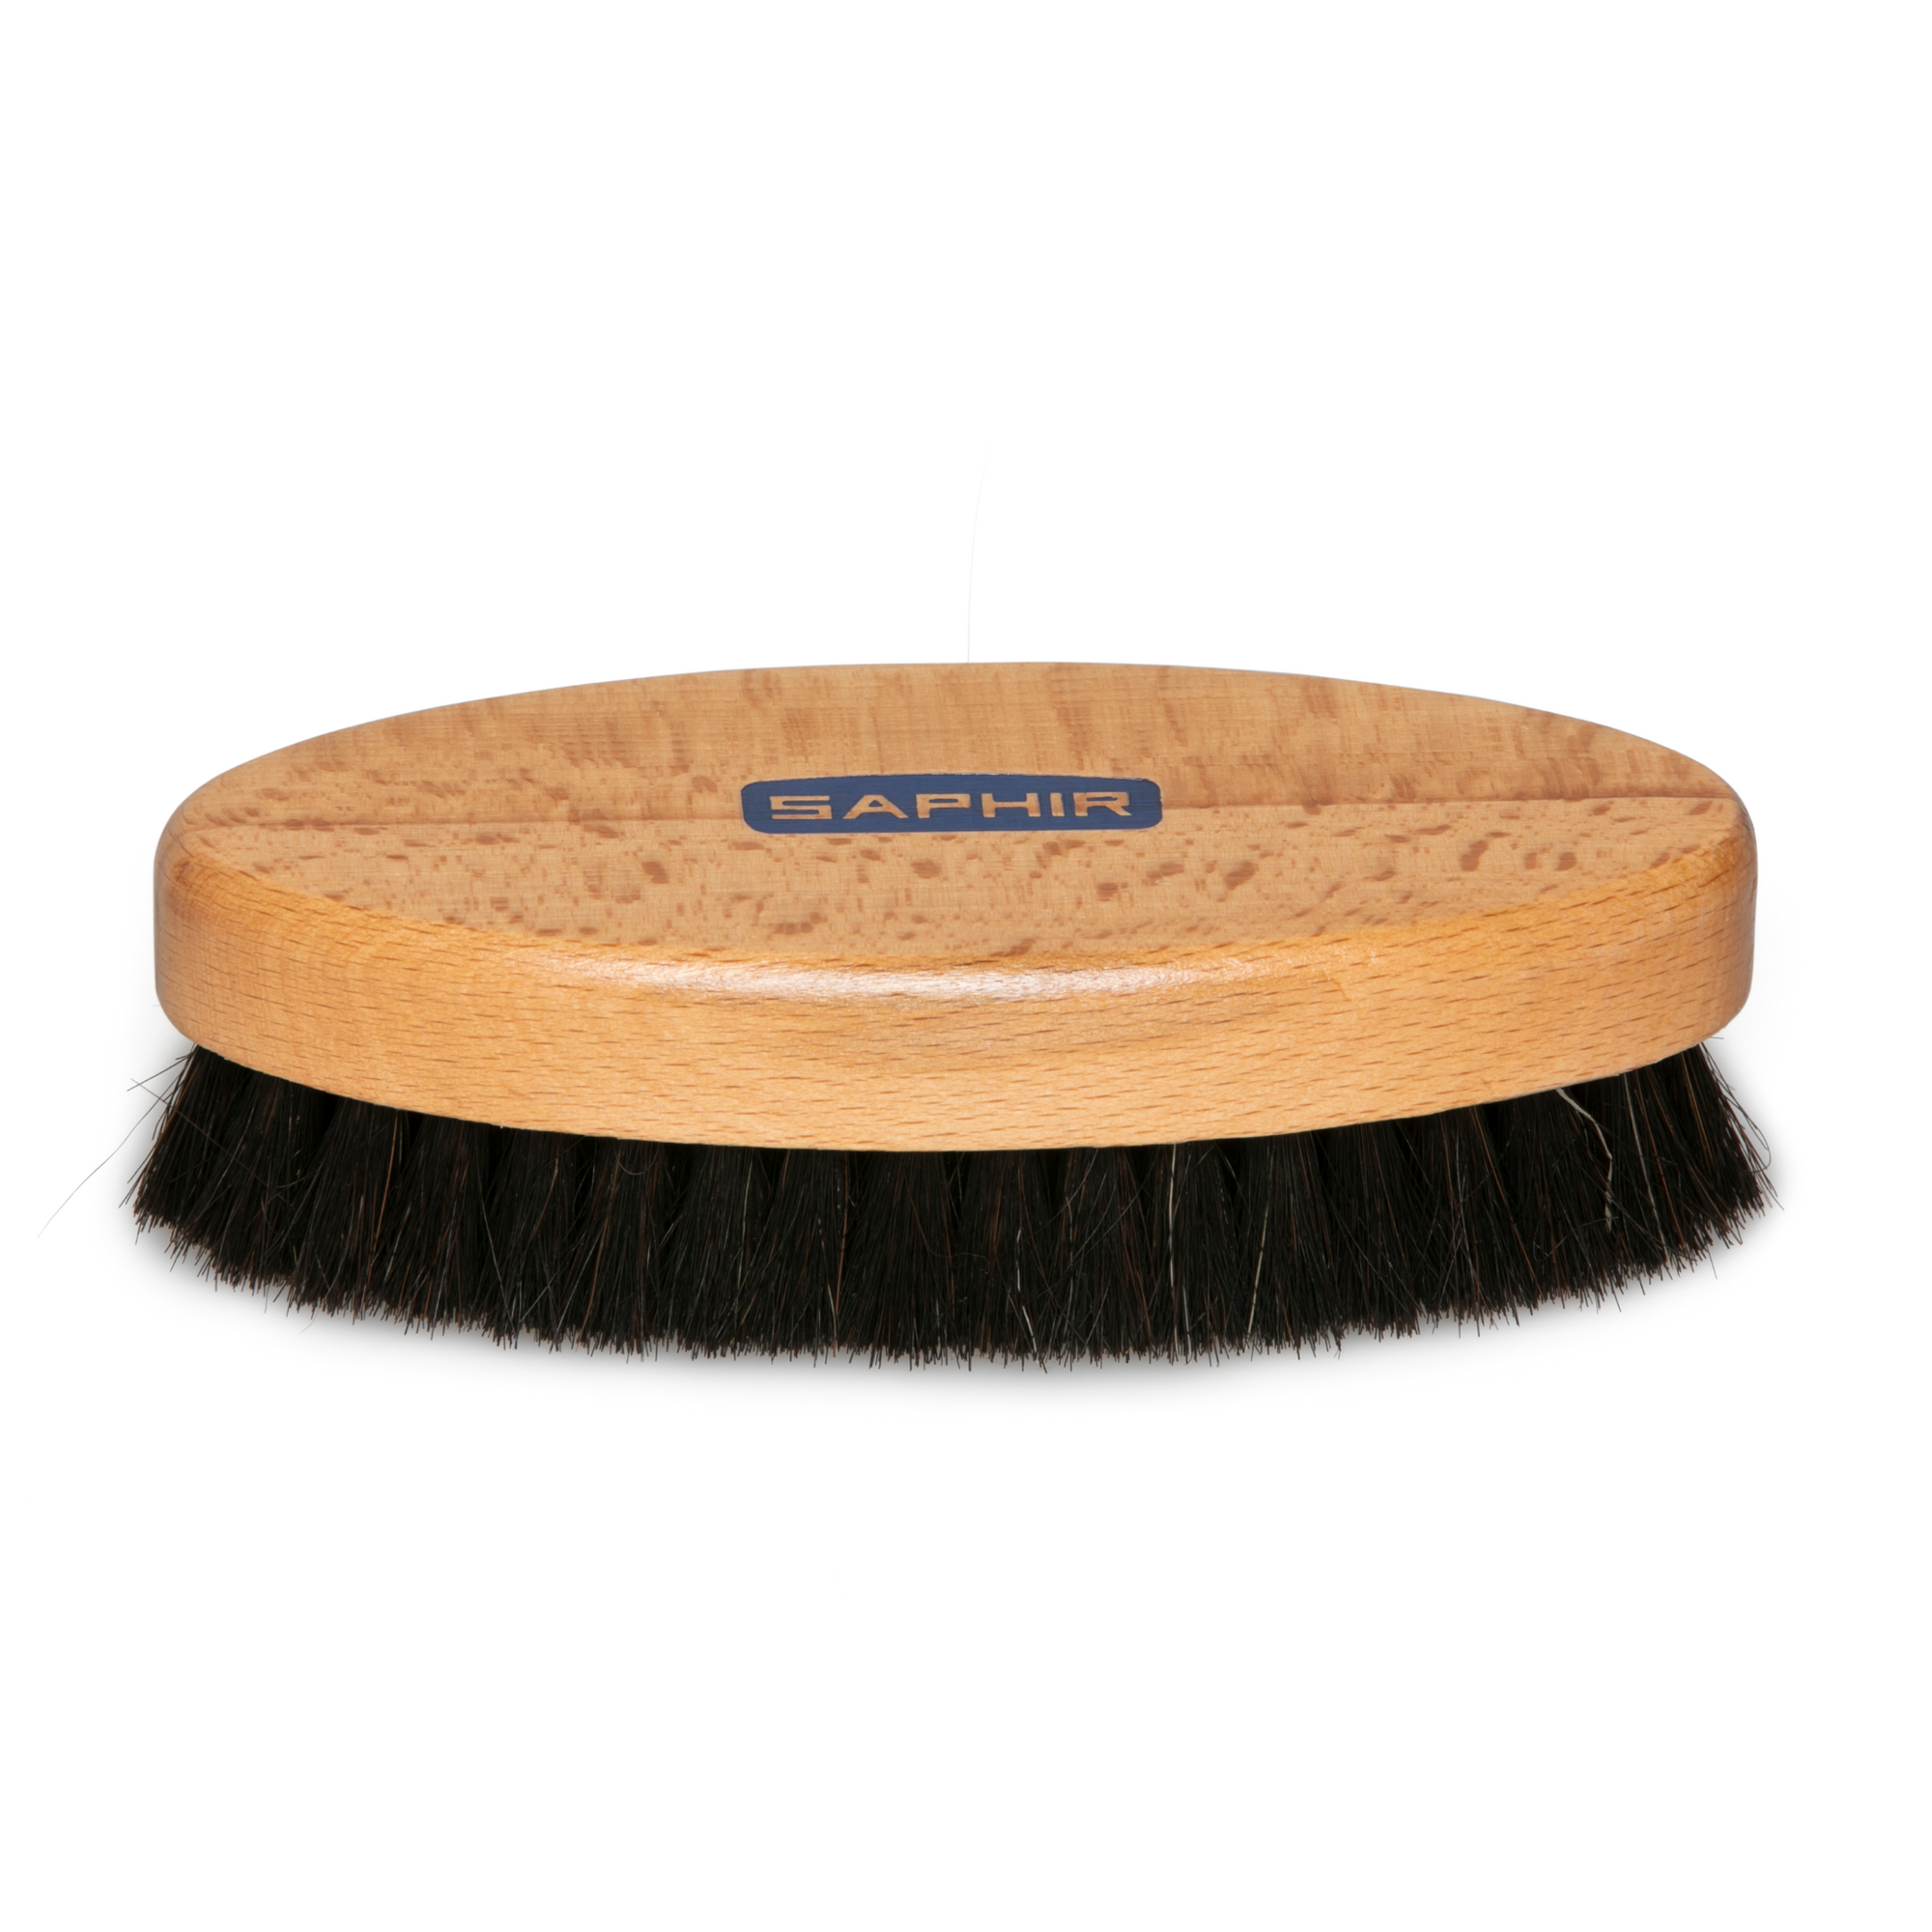 Saphir Oval Brush for leather care. Stocked in Australia